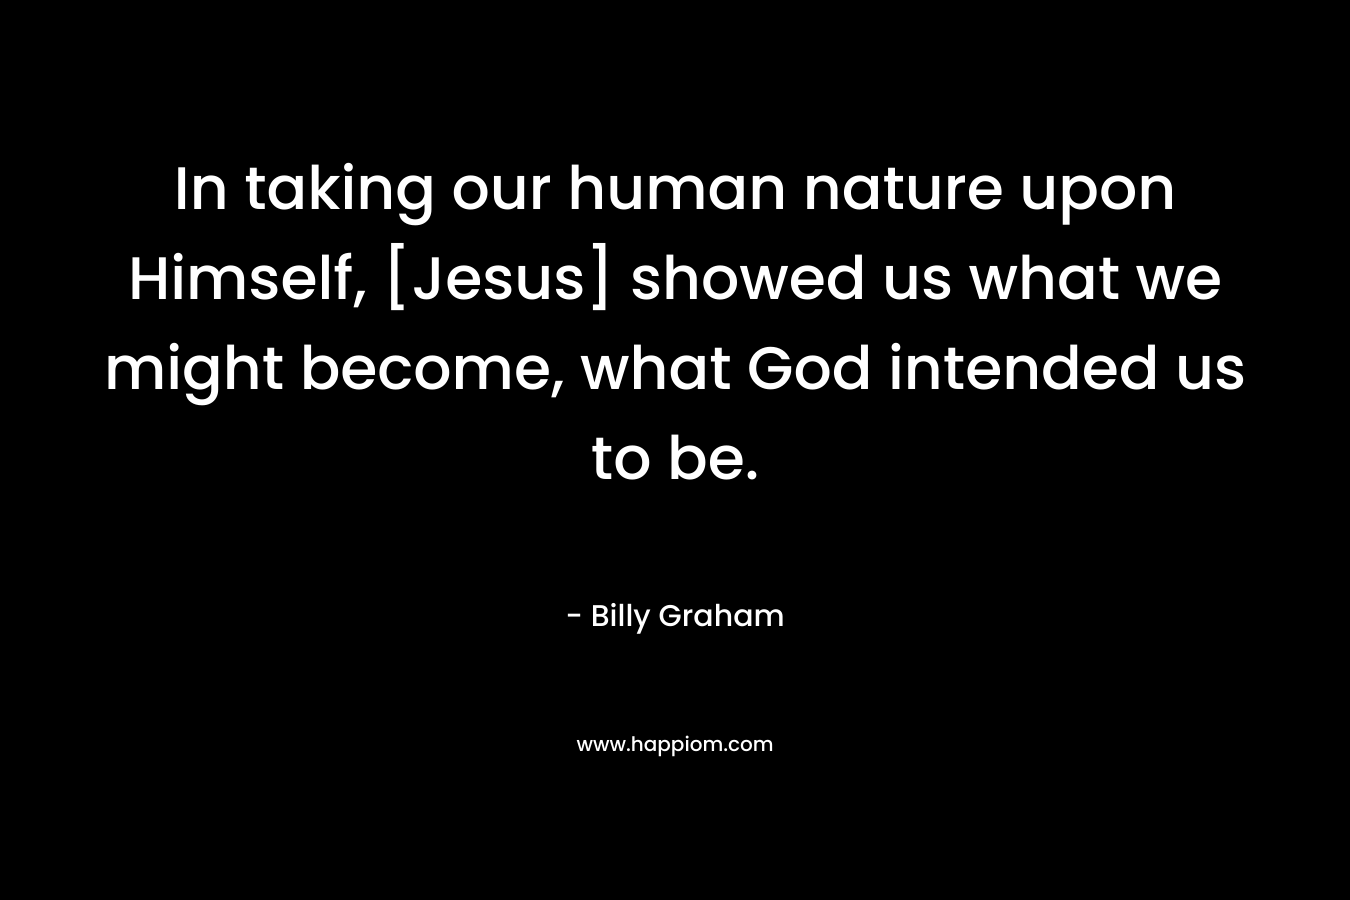 In taking our human nature upon Himself, [Jesus] showed us what we might become, what God intended us to be.